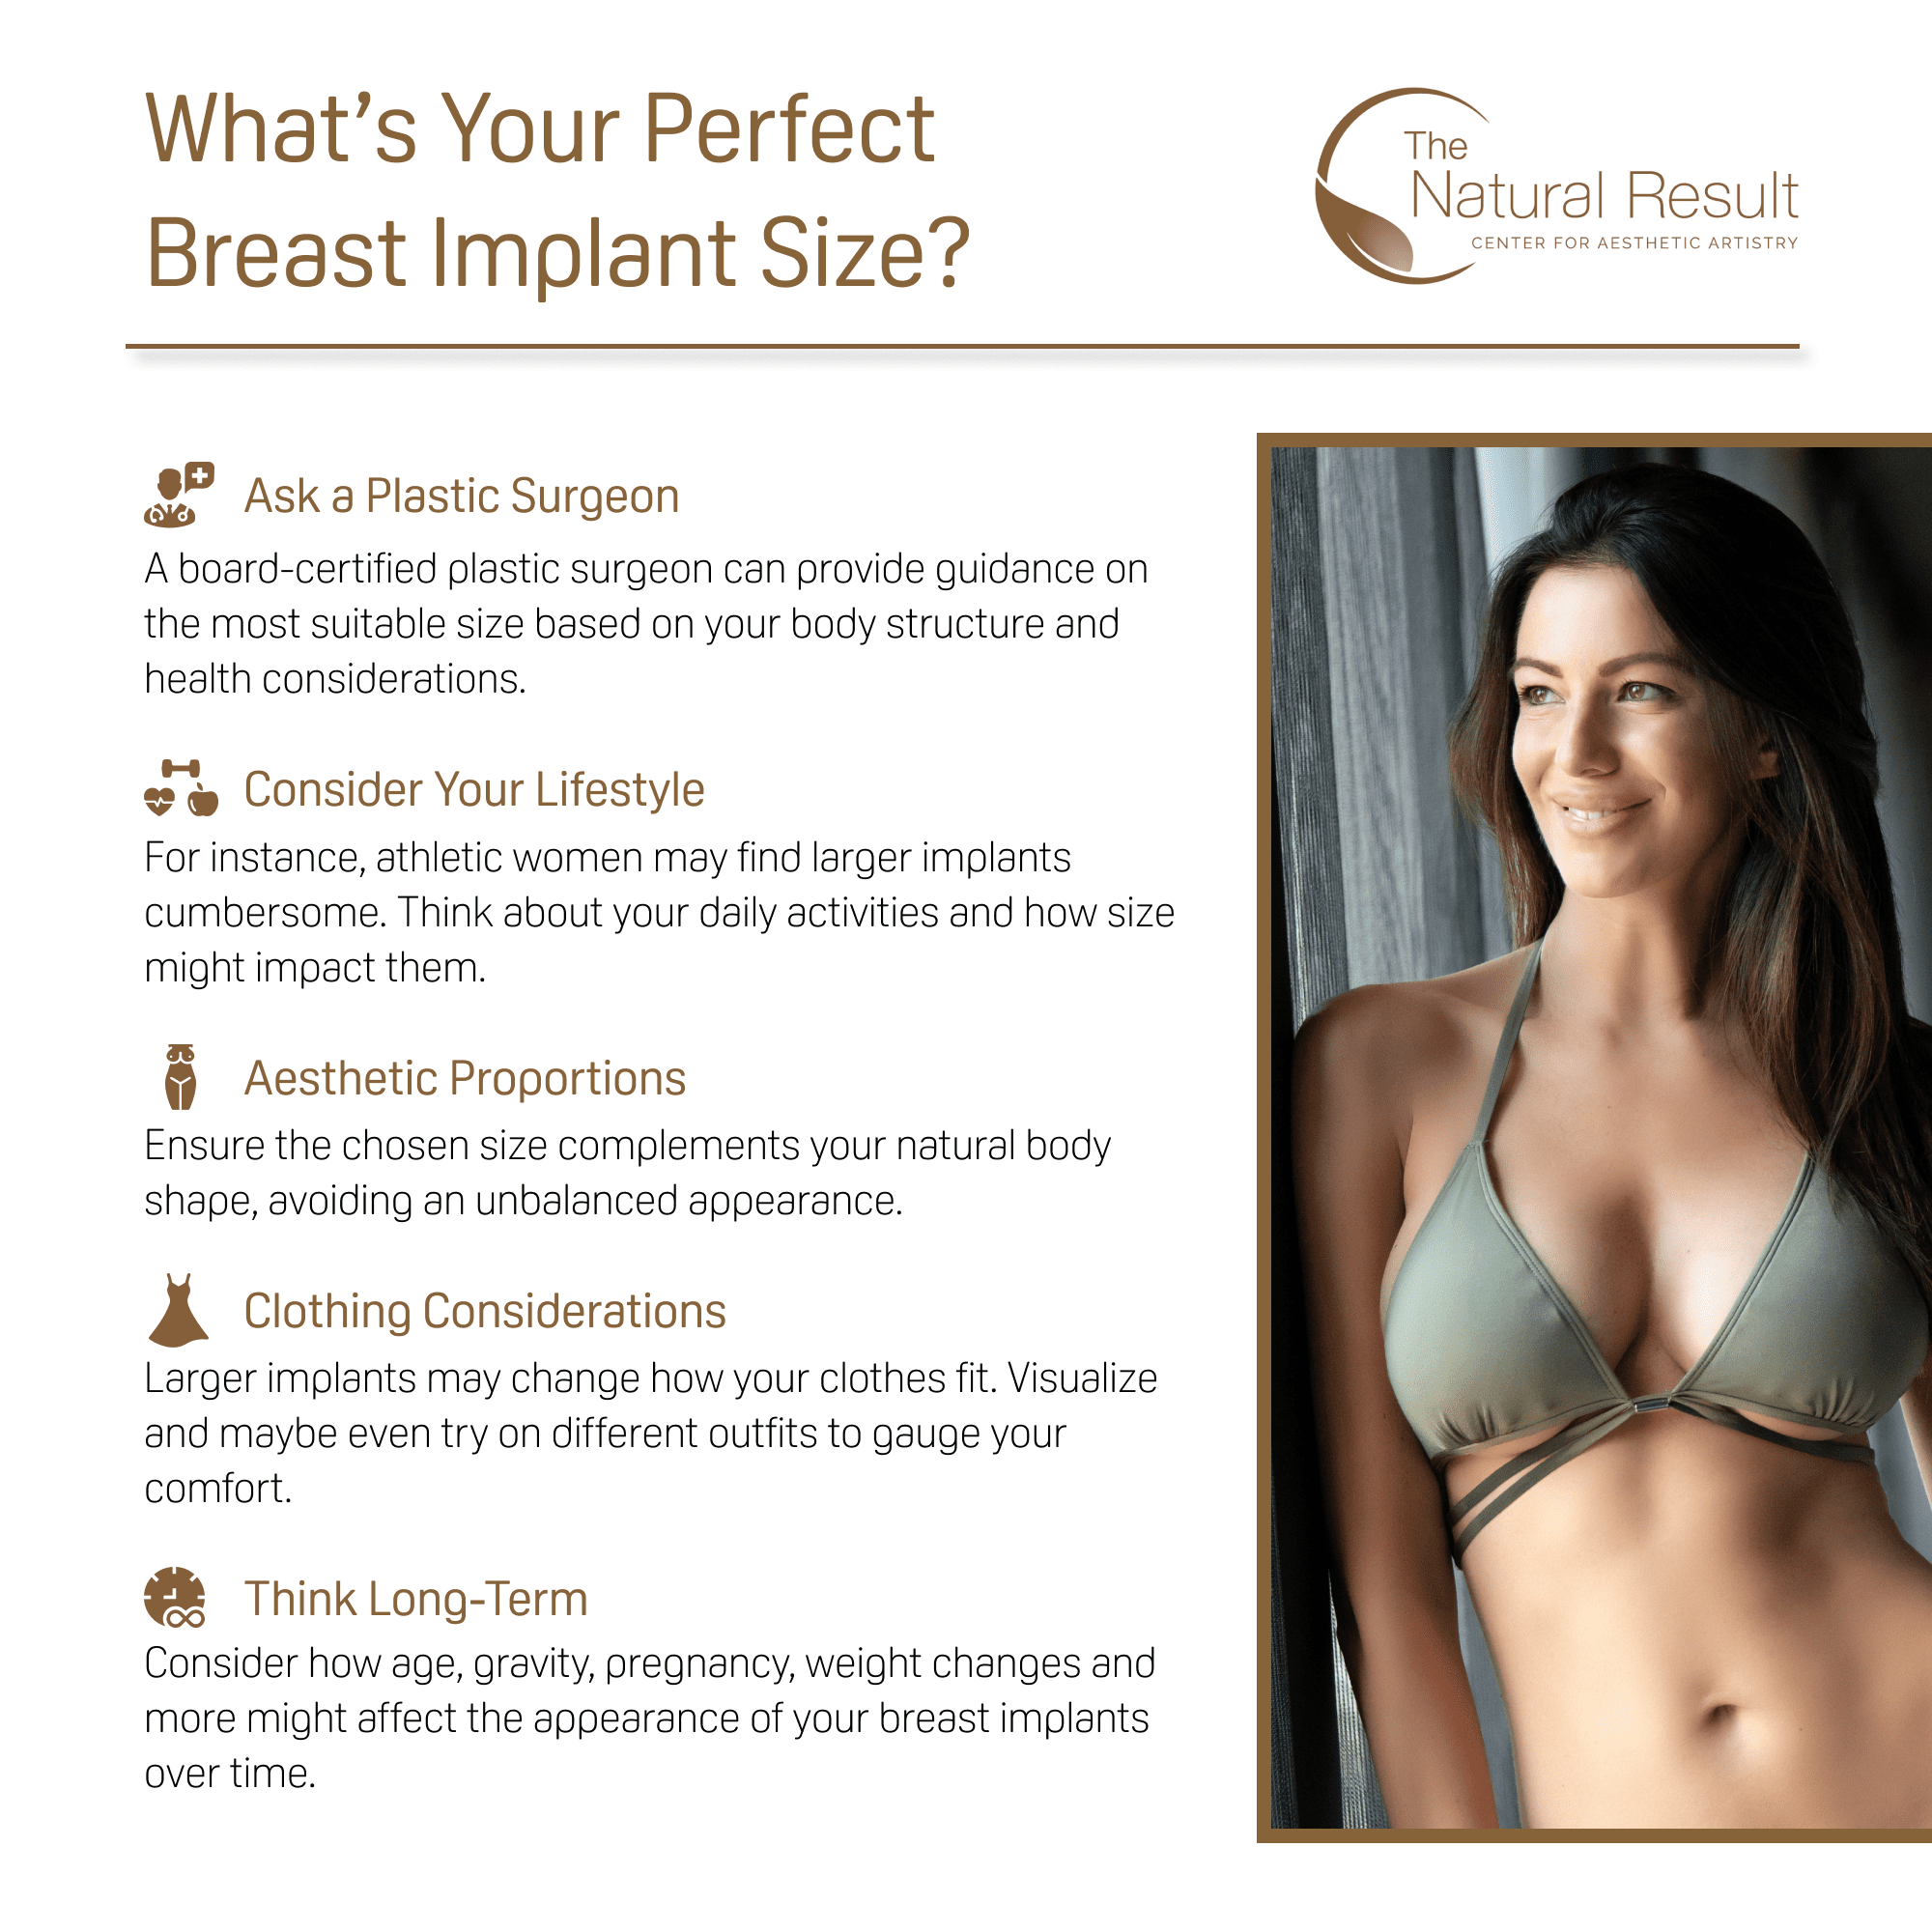 What's Your Perfect Breast Implant Size?